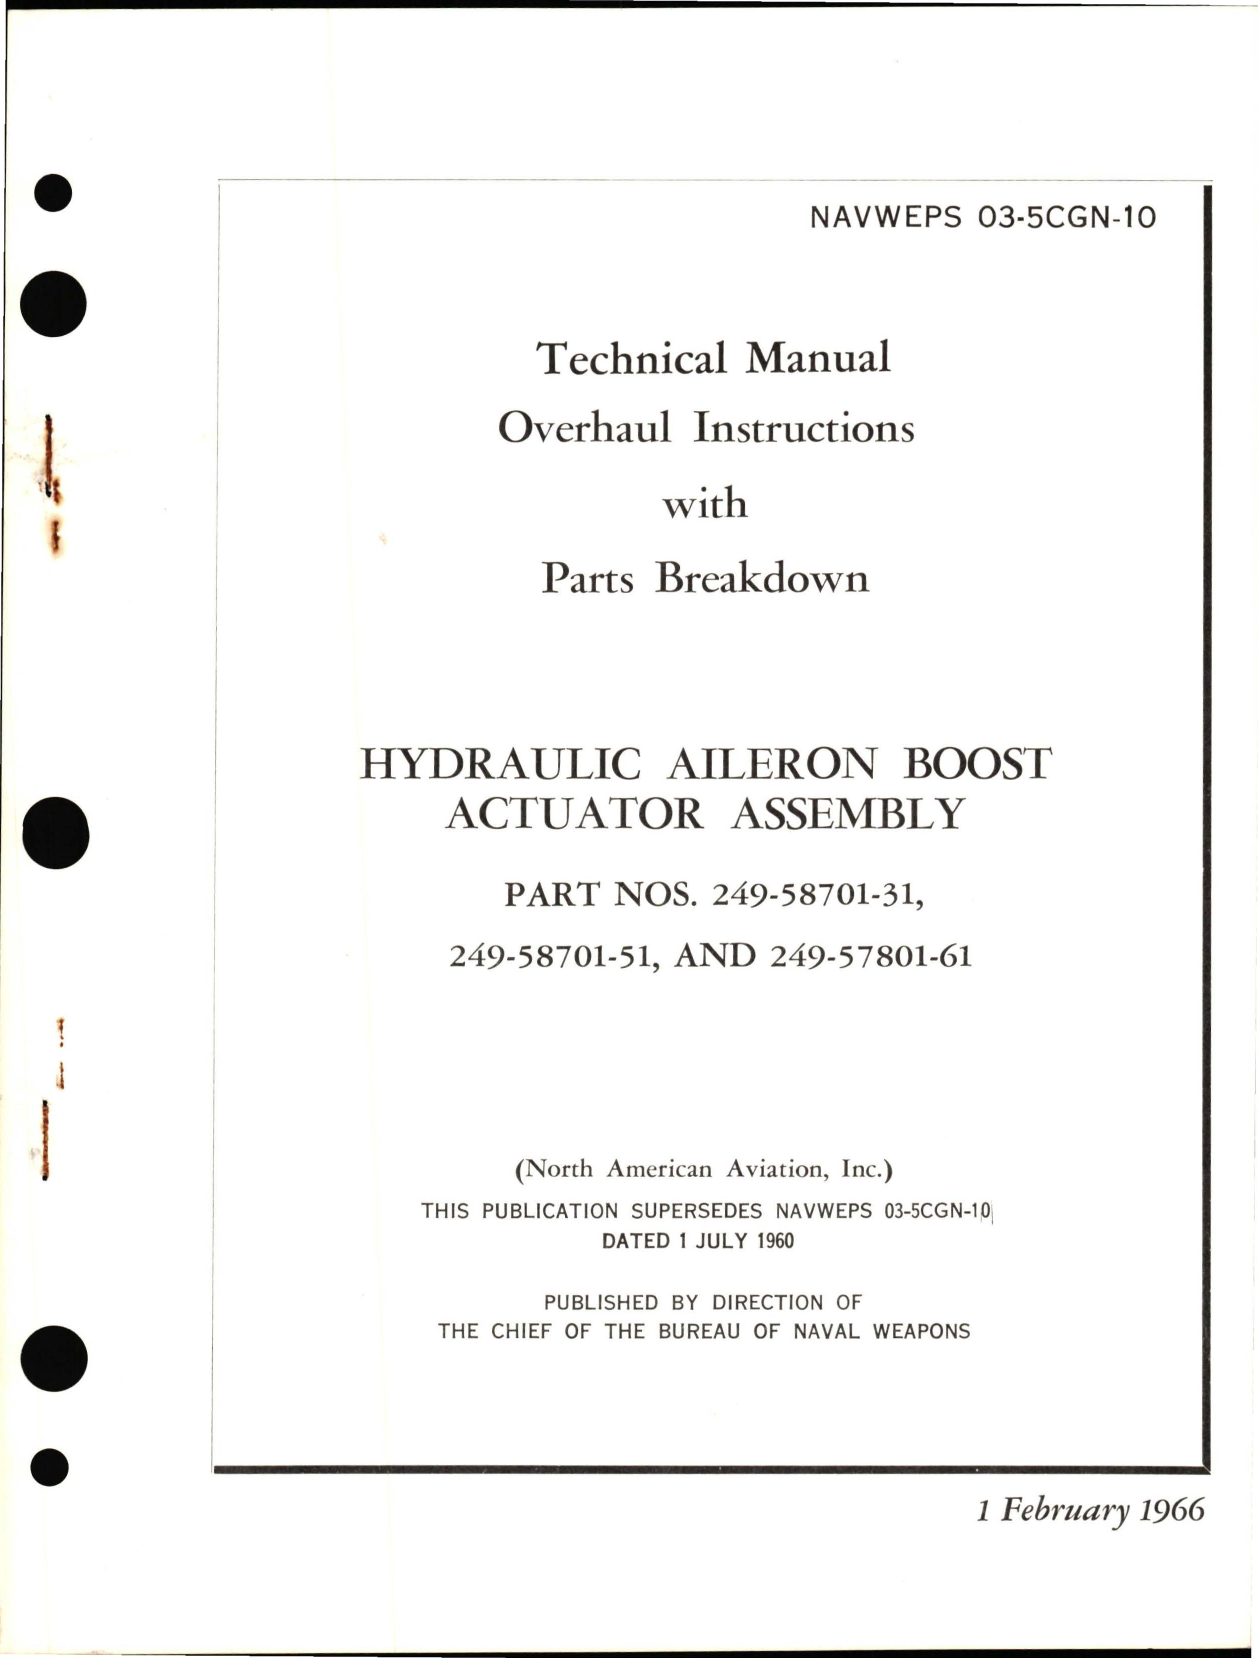 Sample page 1 from AirCorps Library document: Overhaul Instructions with Parts Breakdown for Hydraulic Aileron Boost Actuator Assembly - Parts 249-58701-31, 249-58701-51 and 249-57801-61